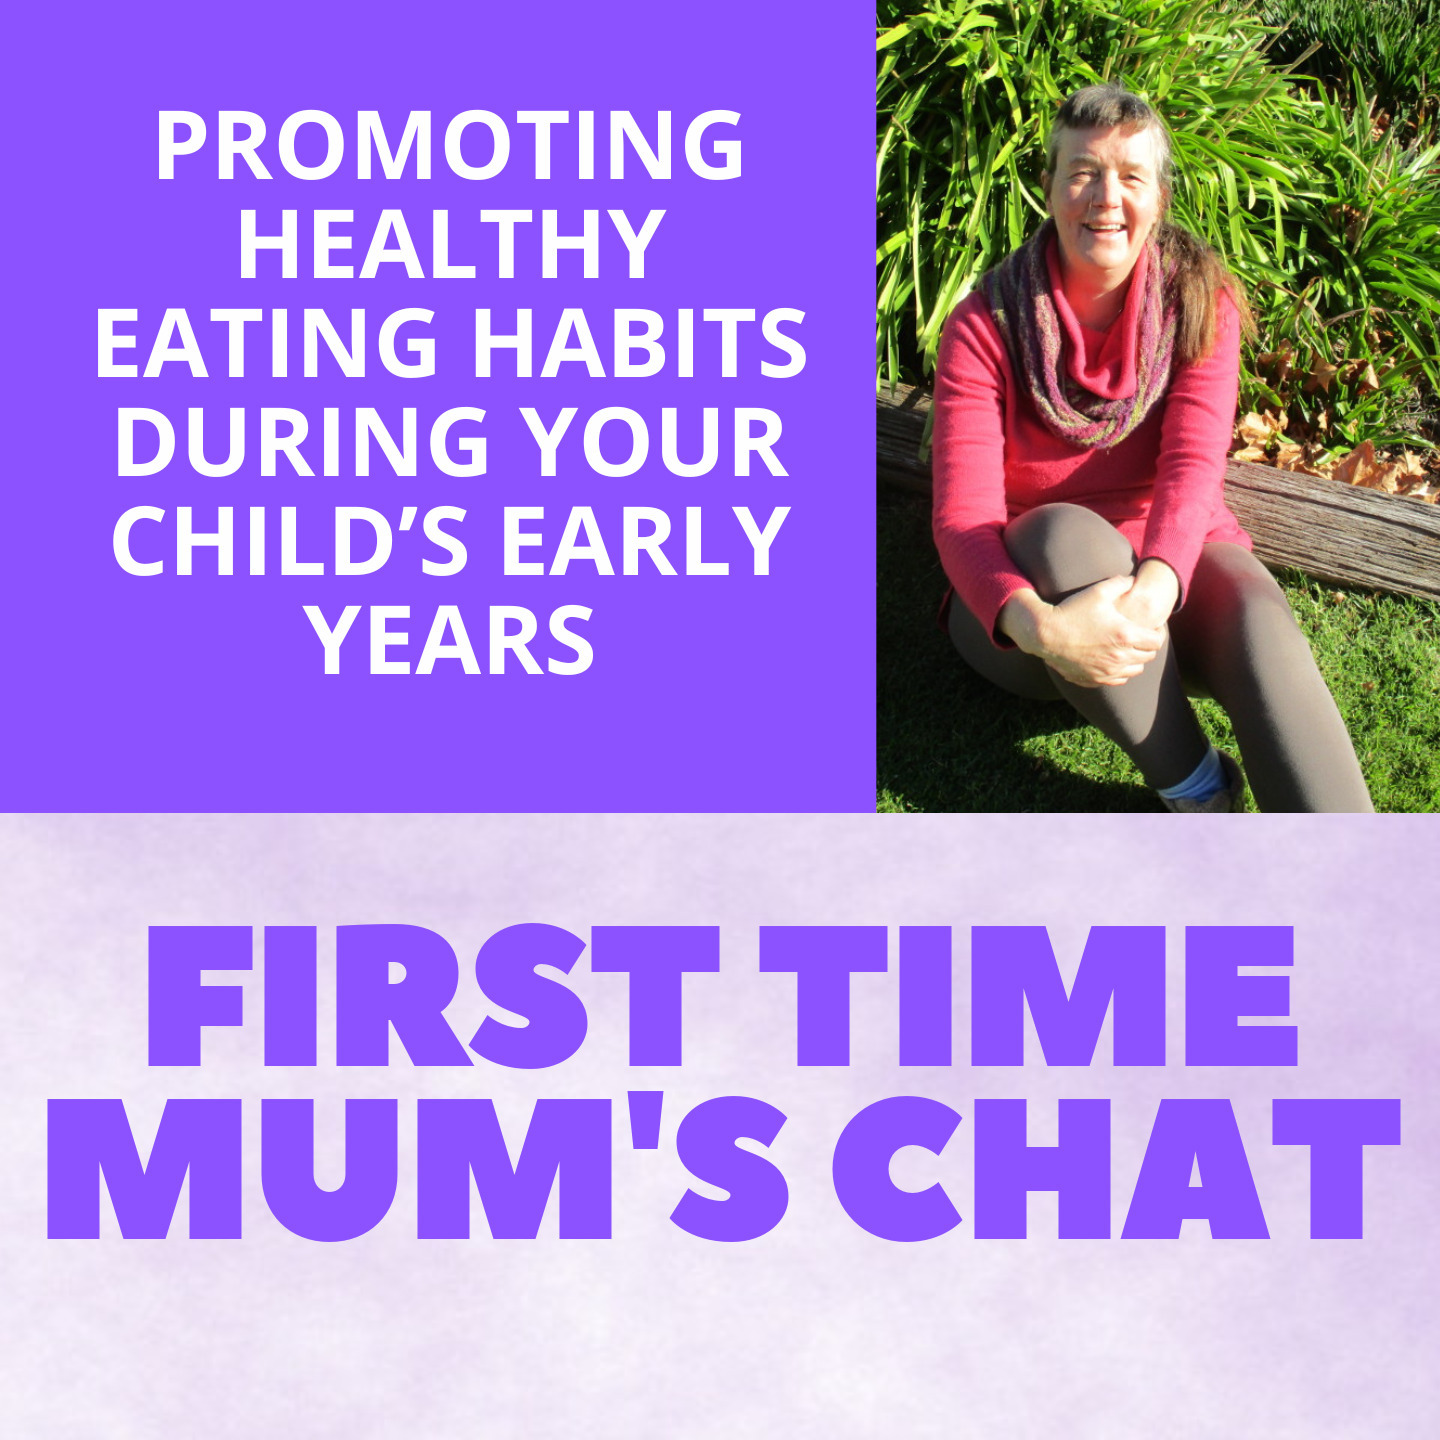 Promoting Healthy Eating Habits During Your Child's Early Years